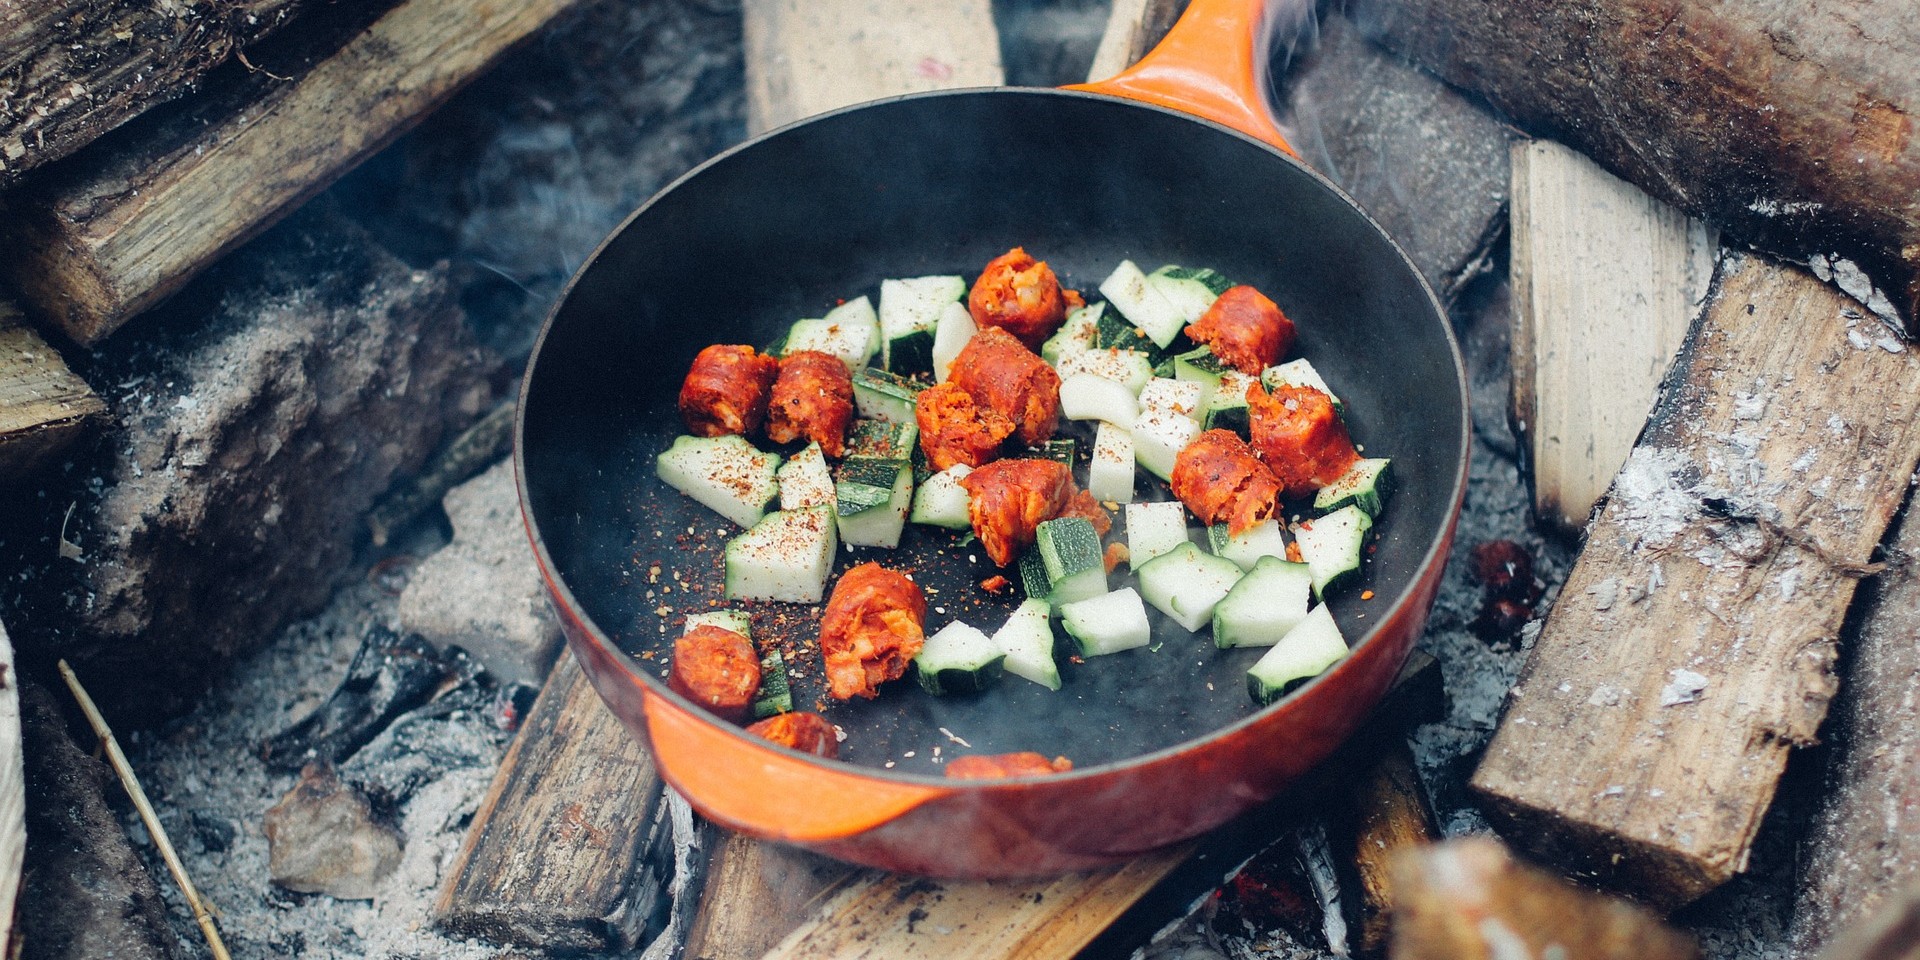 Top 5 Camping Recipes To Have an Absolute Blast